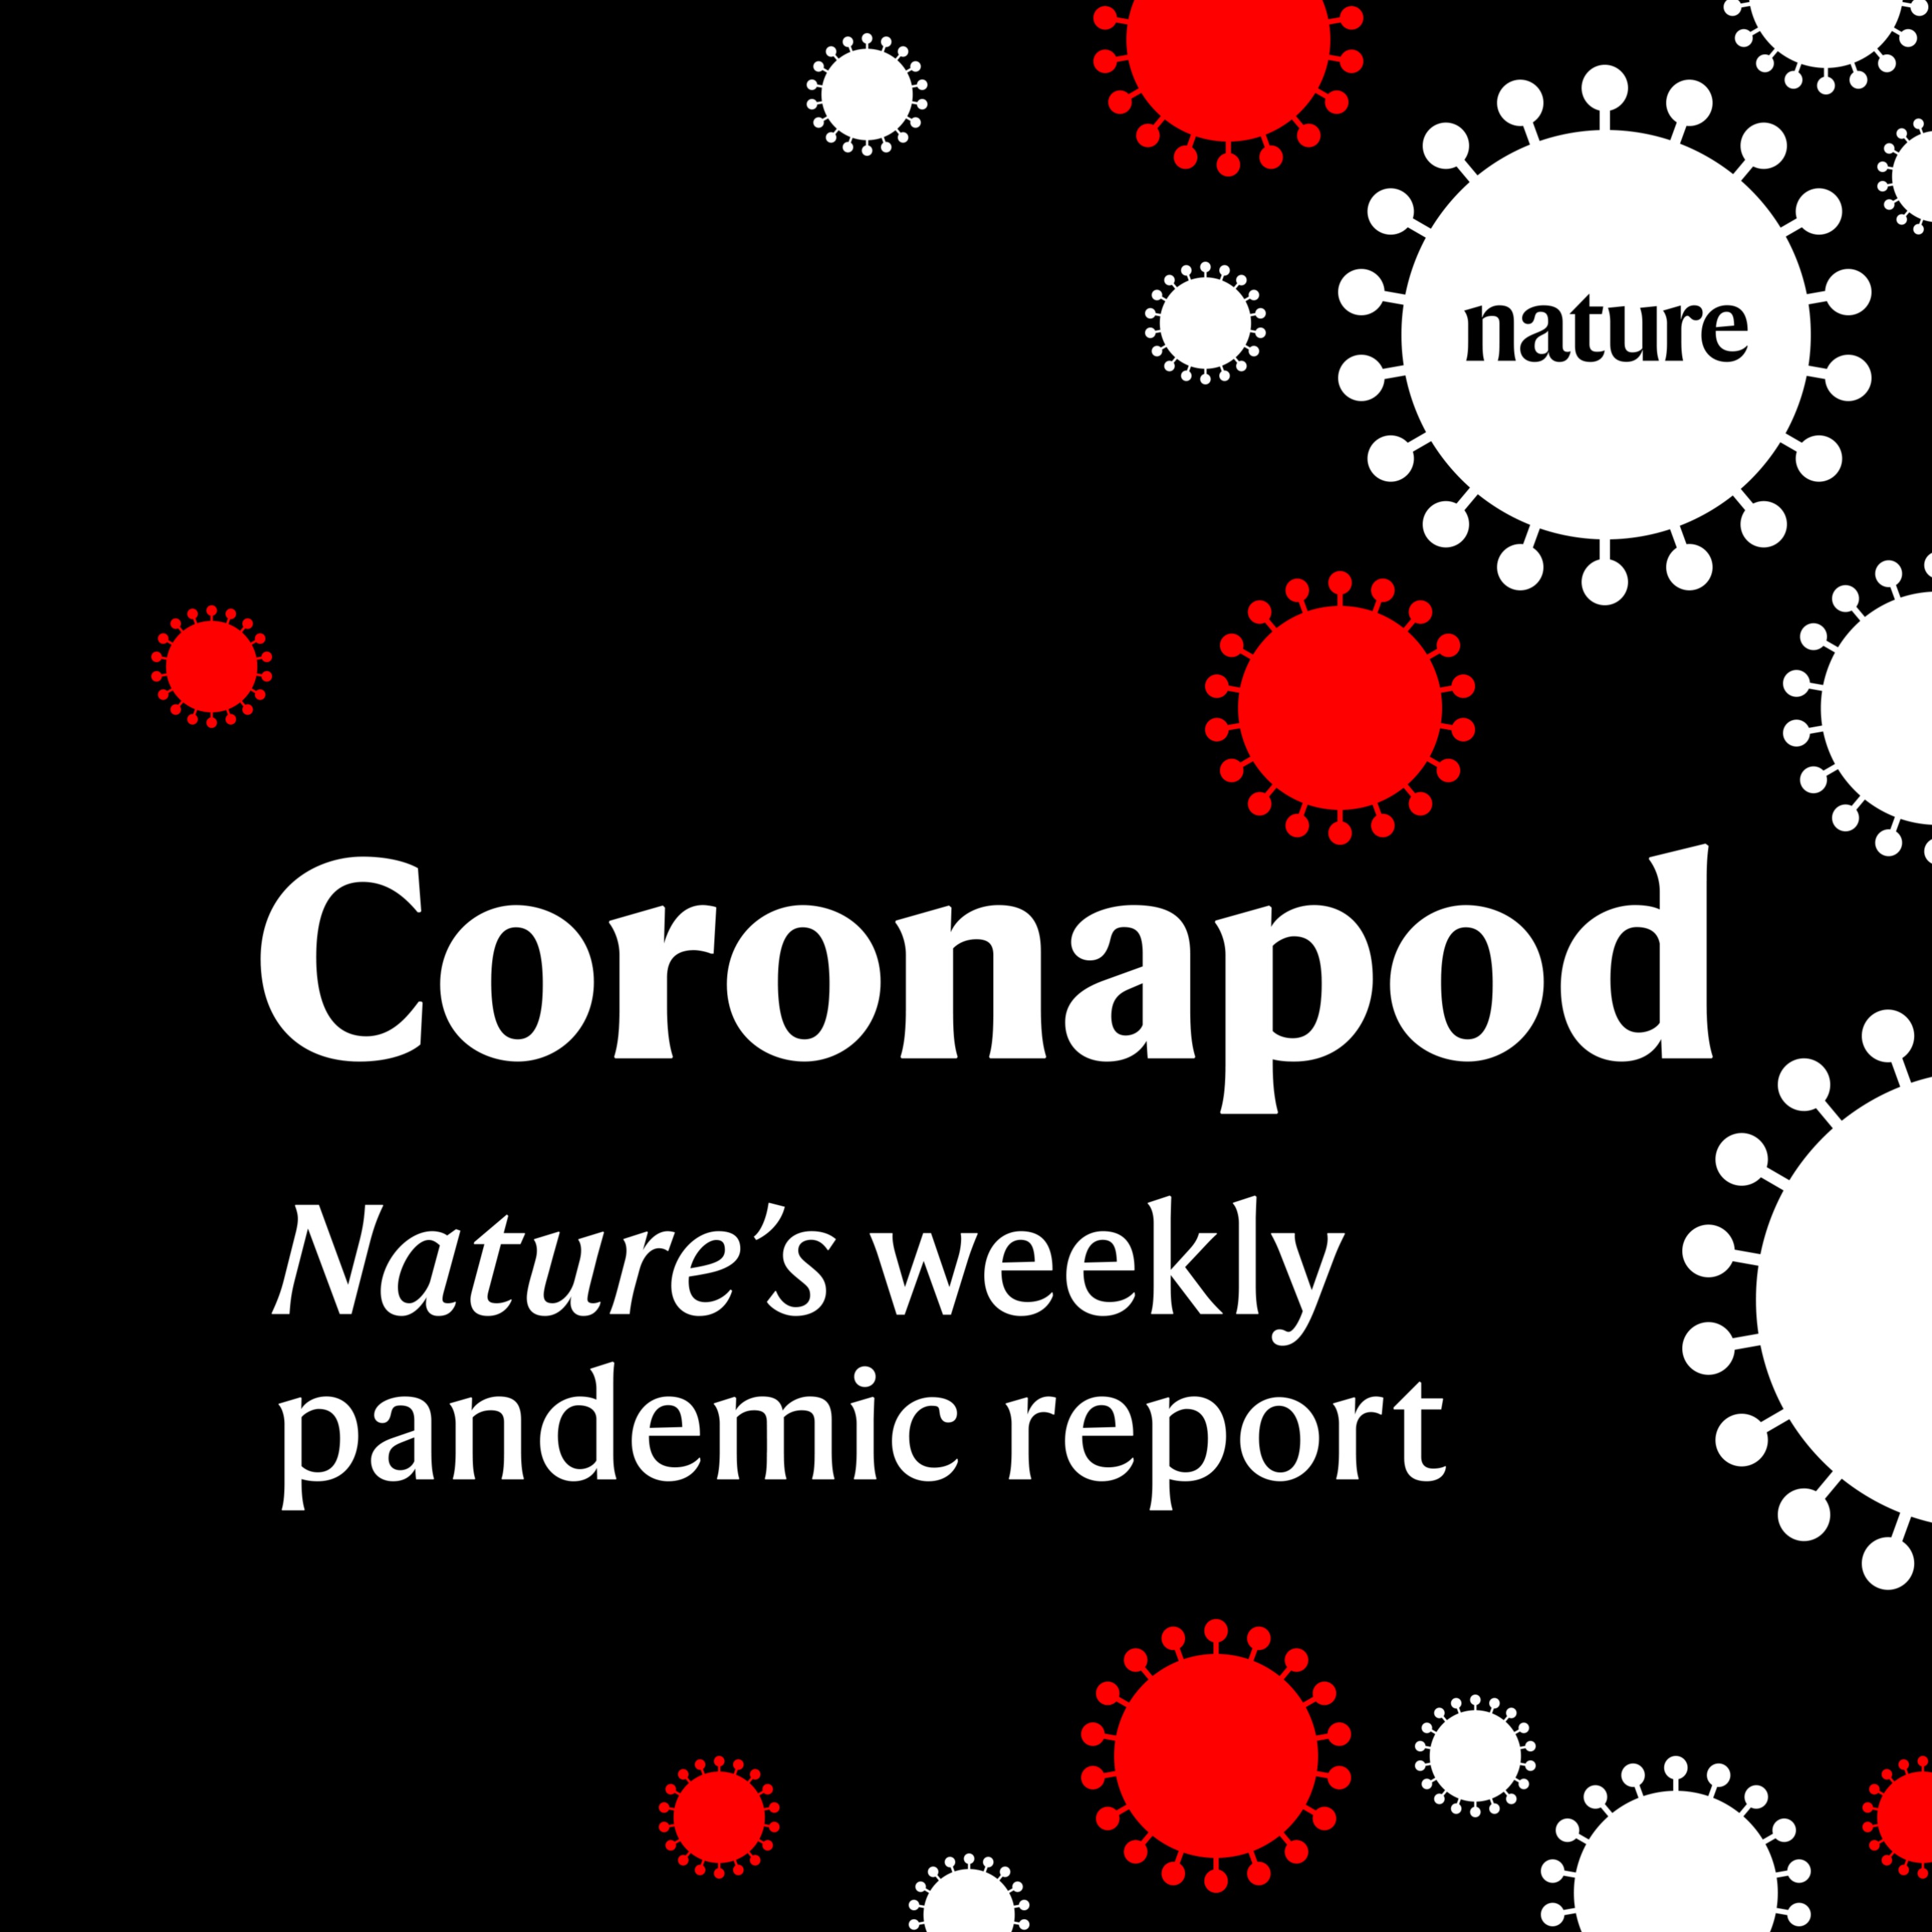 Coronapod: why stopping COVID testing would be a mistake